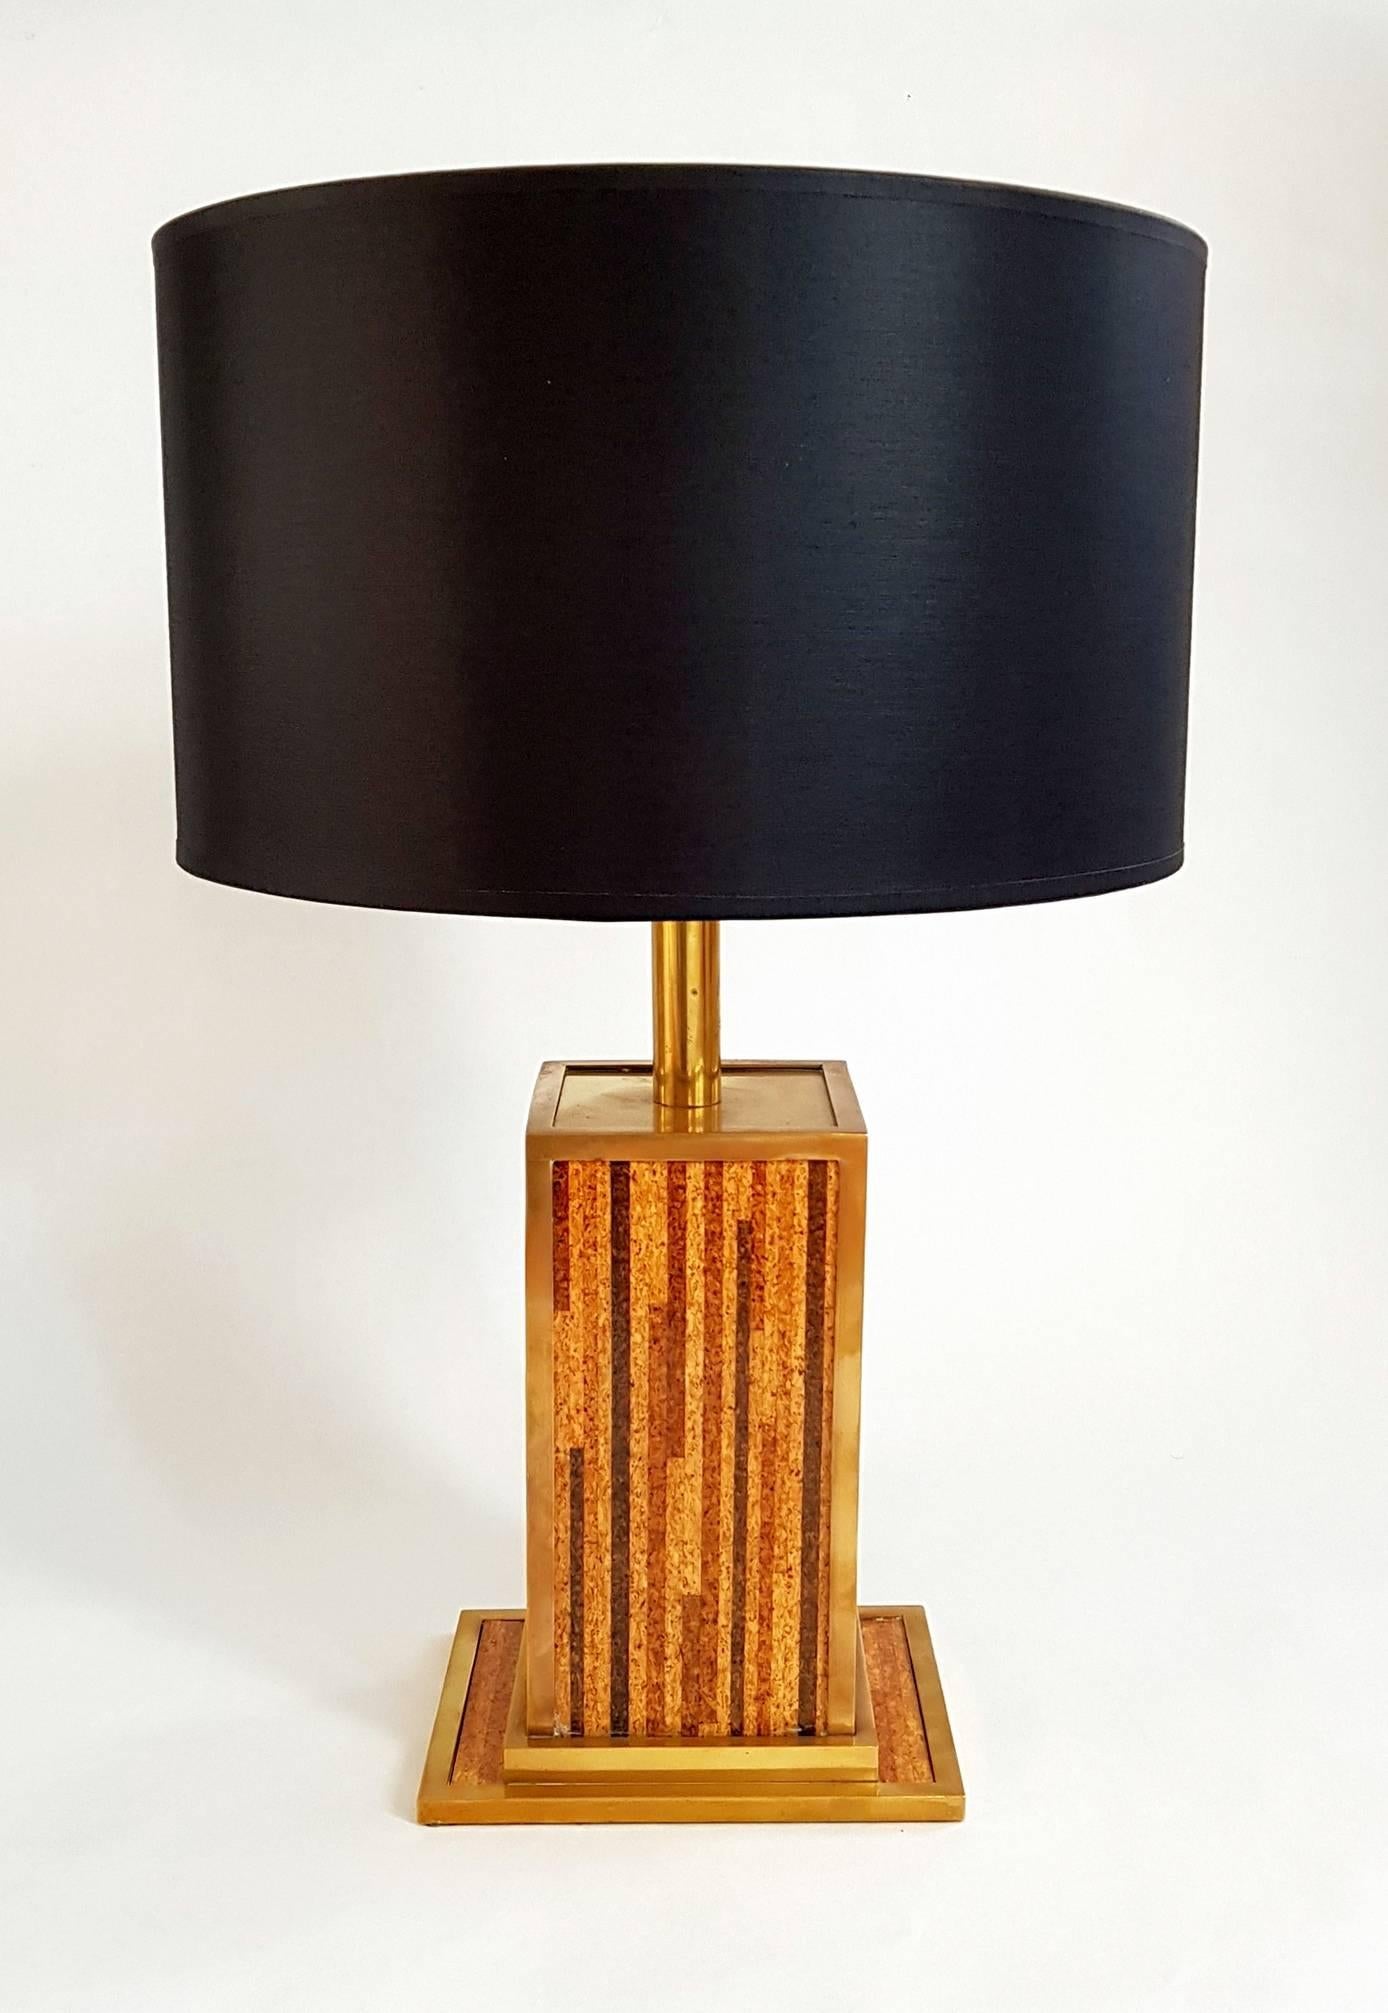 Stylish table lamp in Art Deco style and different colored cork in striped pattern with a black drum lamp shade. Measurements are given including the lampshade.